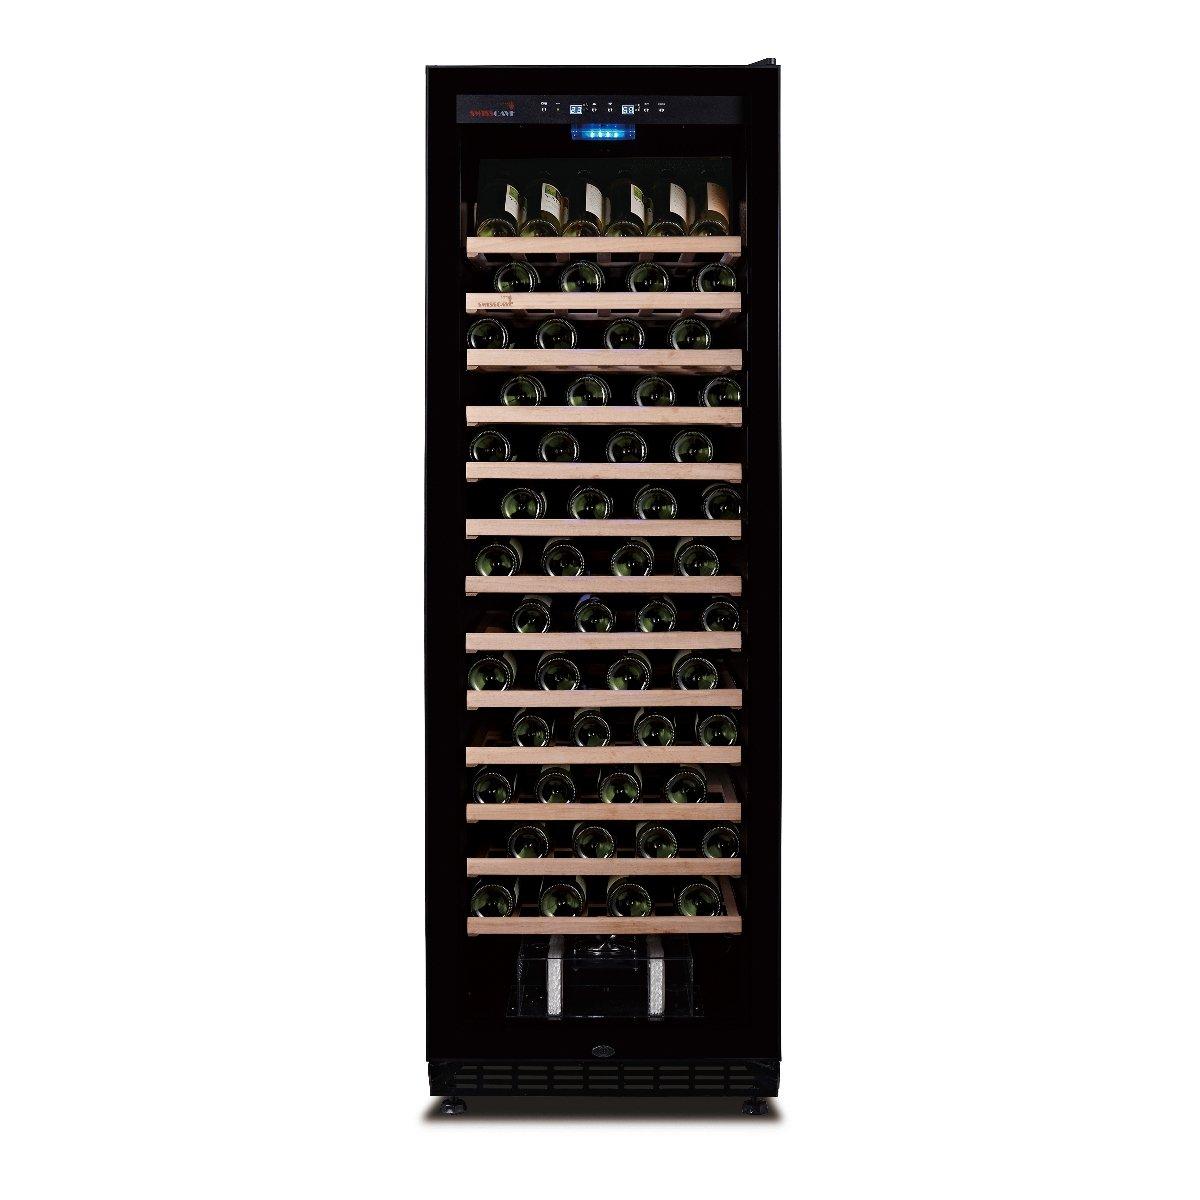 Swisscave WLB-450FHU - Black Edition - Single Zone Wine Cooler / Wine Fridge (170-200 BOT) with Active Air Humidification Management - 600mm Wide - winestorageuk